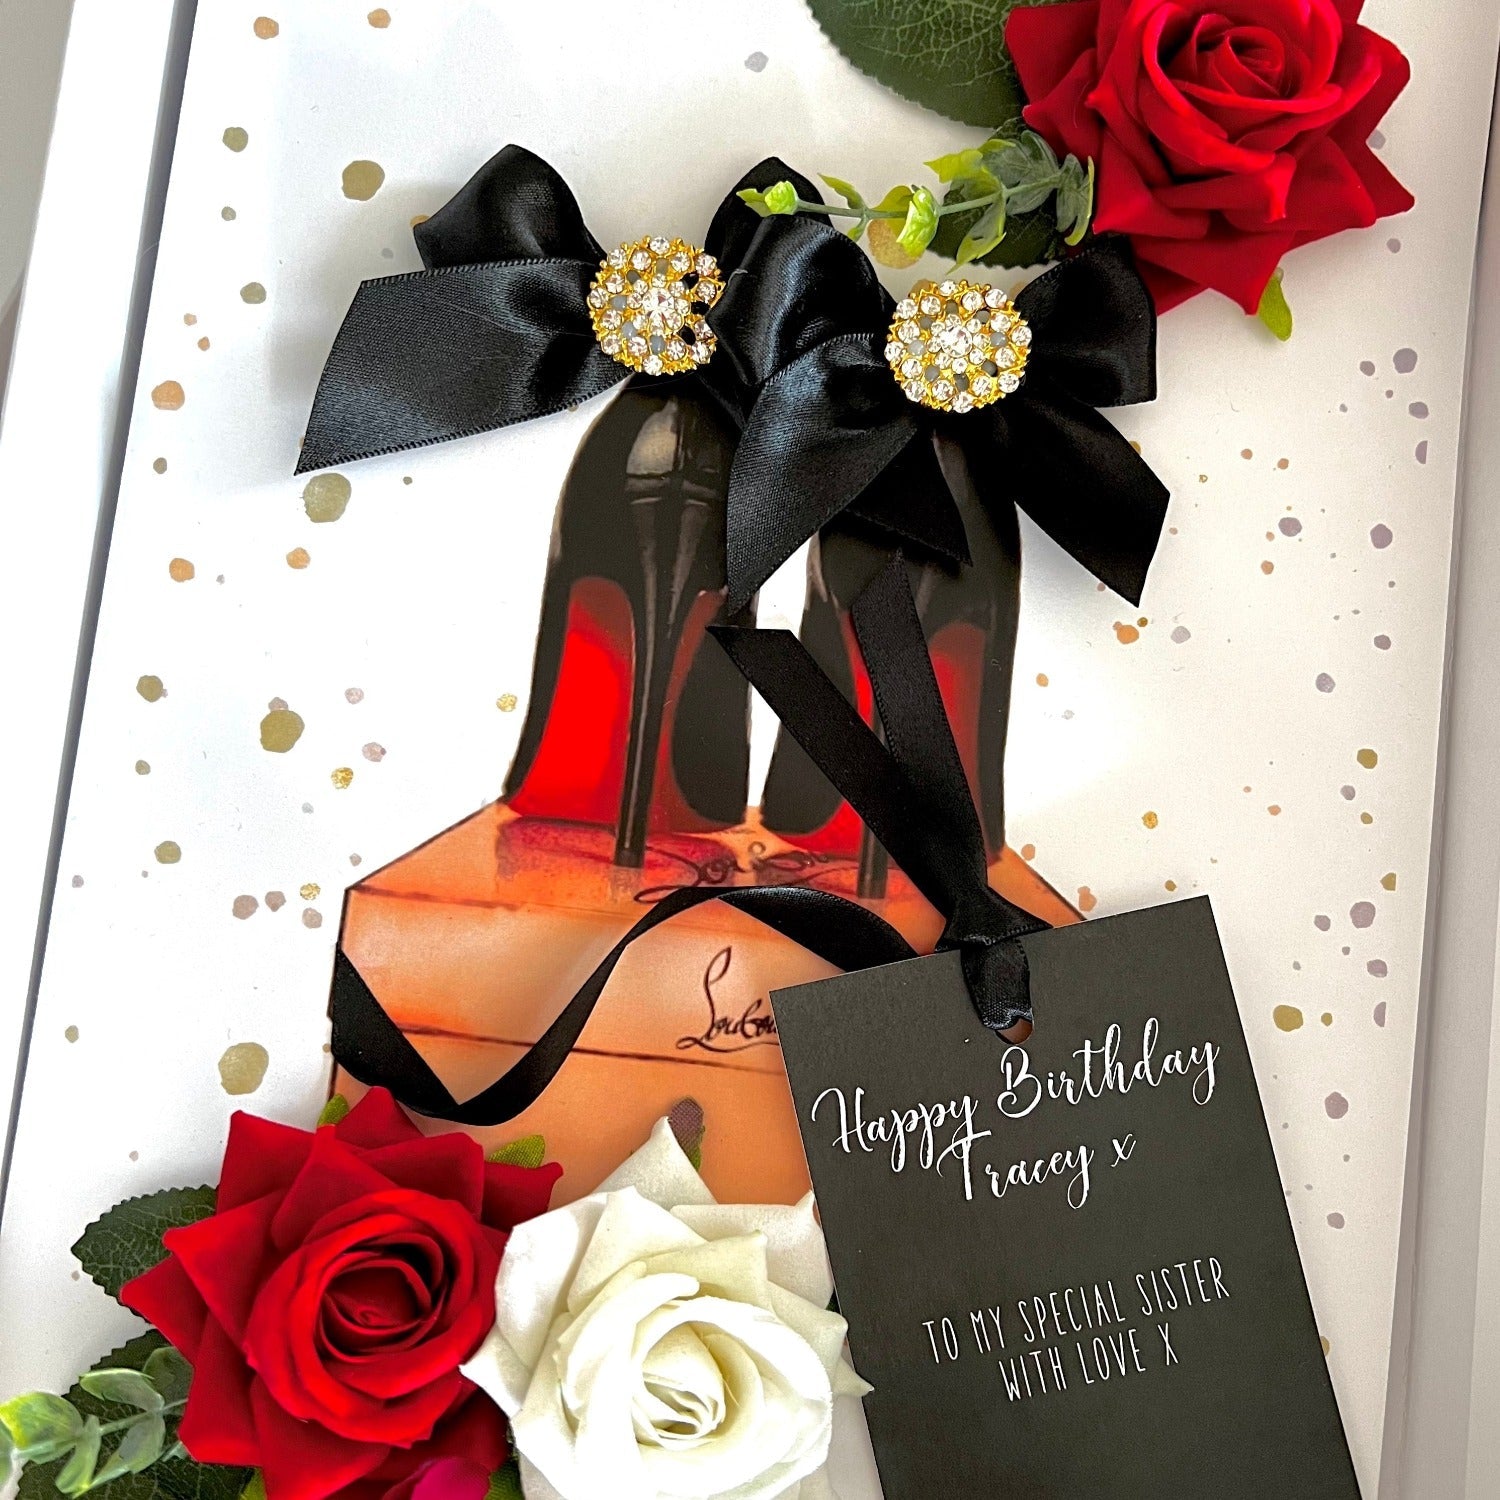 Ladies LOUBOUTIN SHOES Birthday Card - Wife Girlfriend Mother